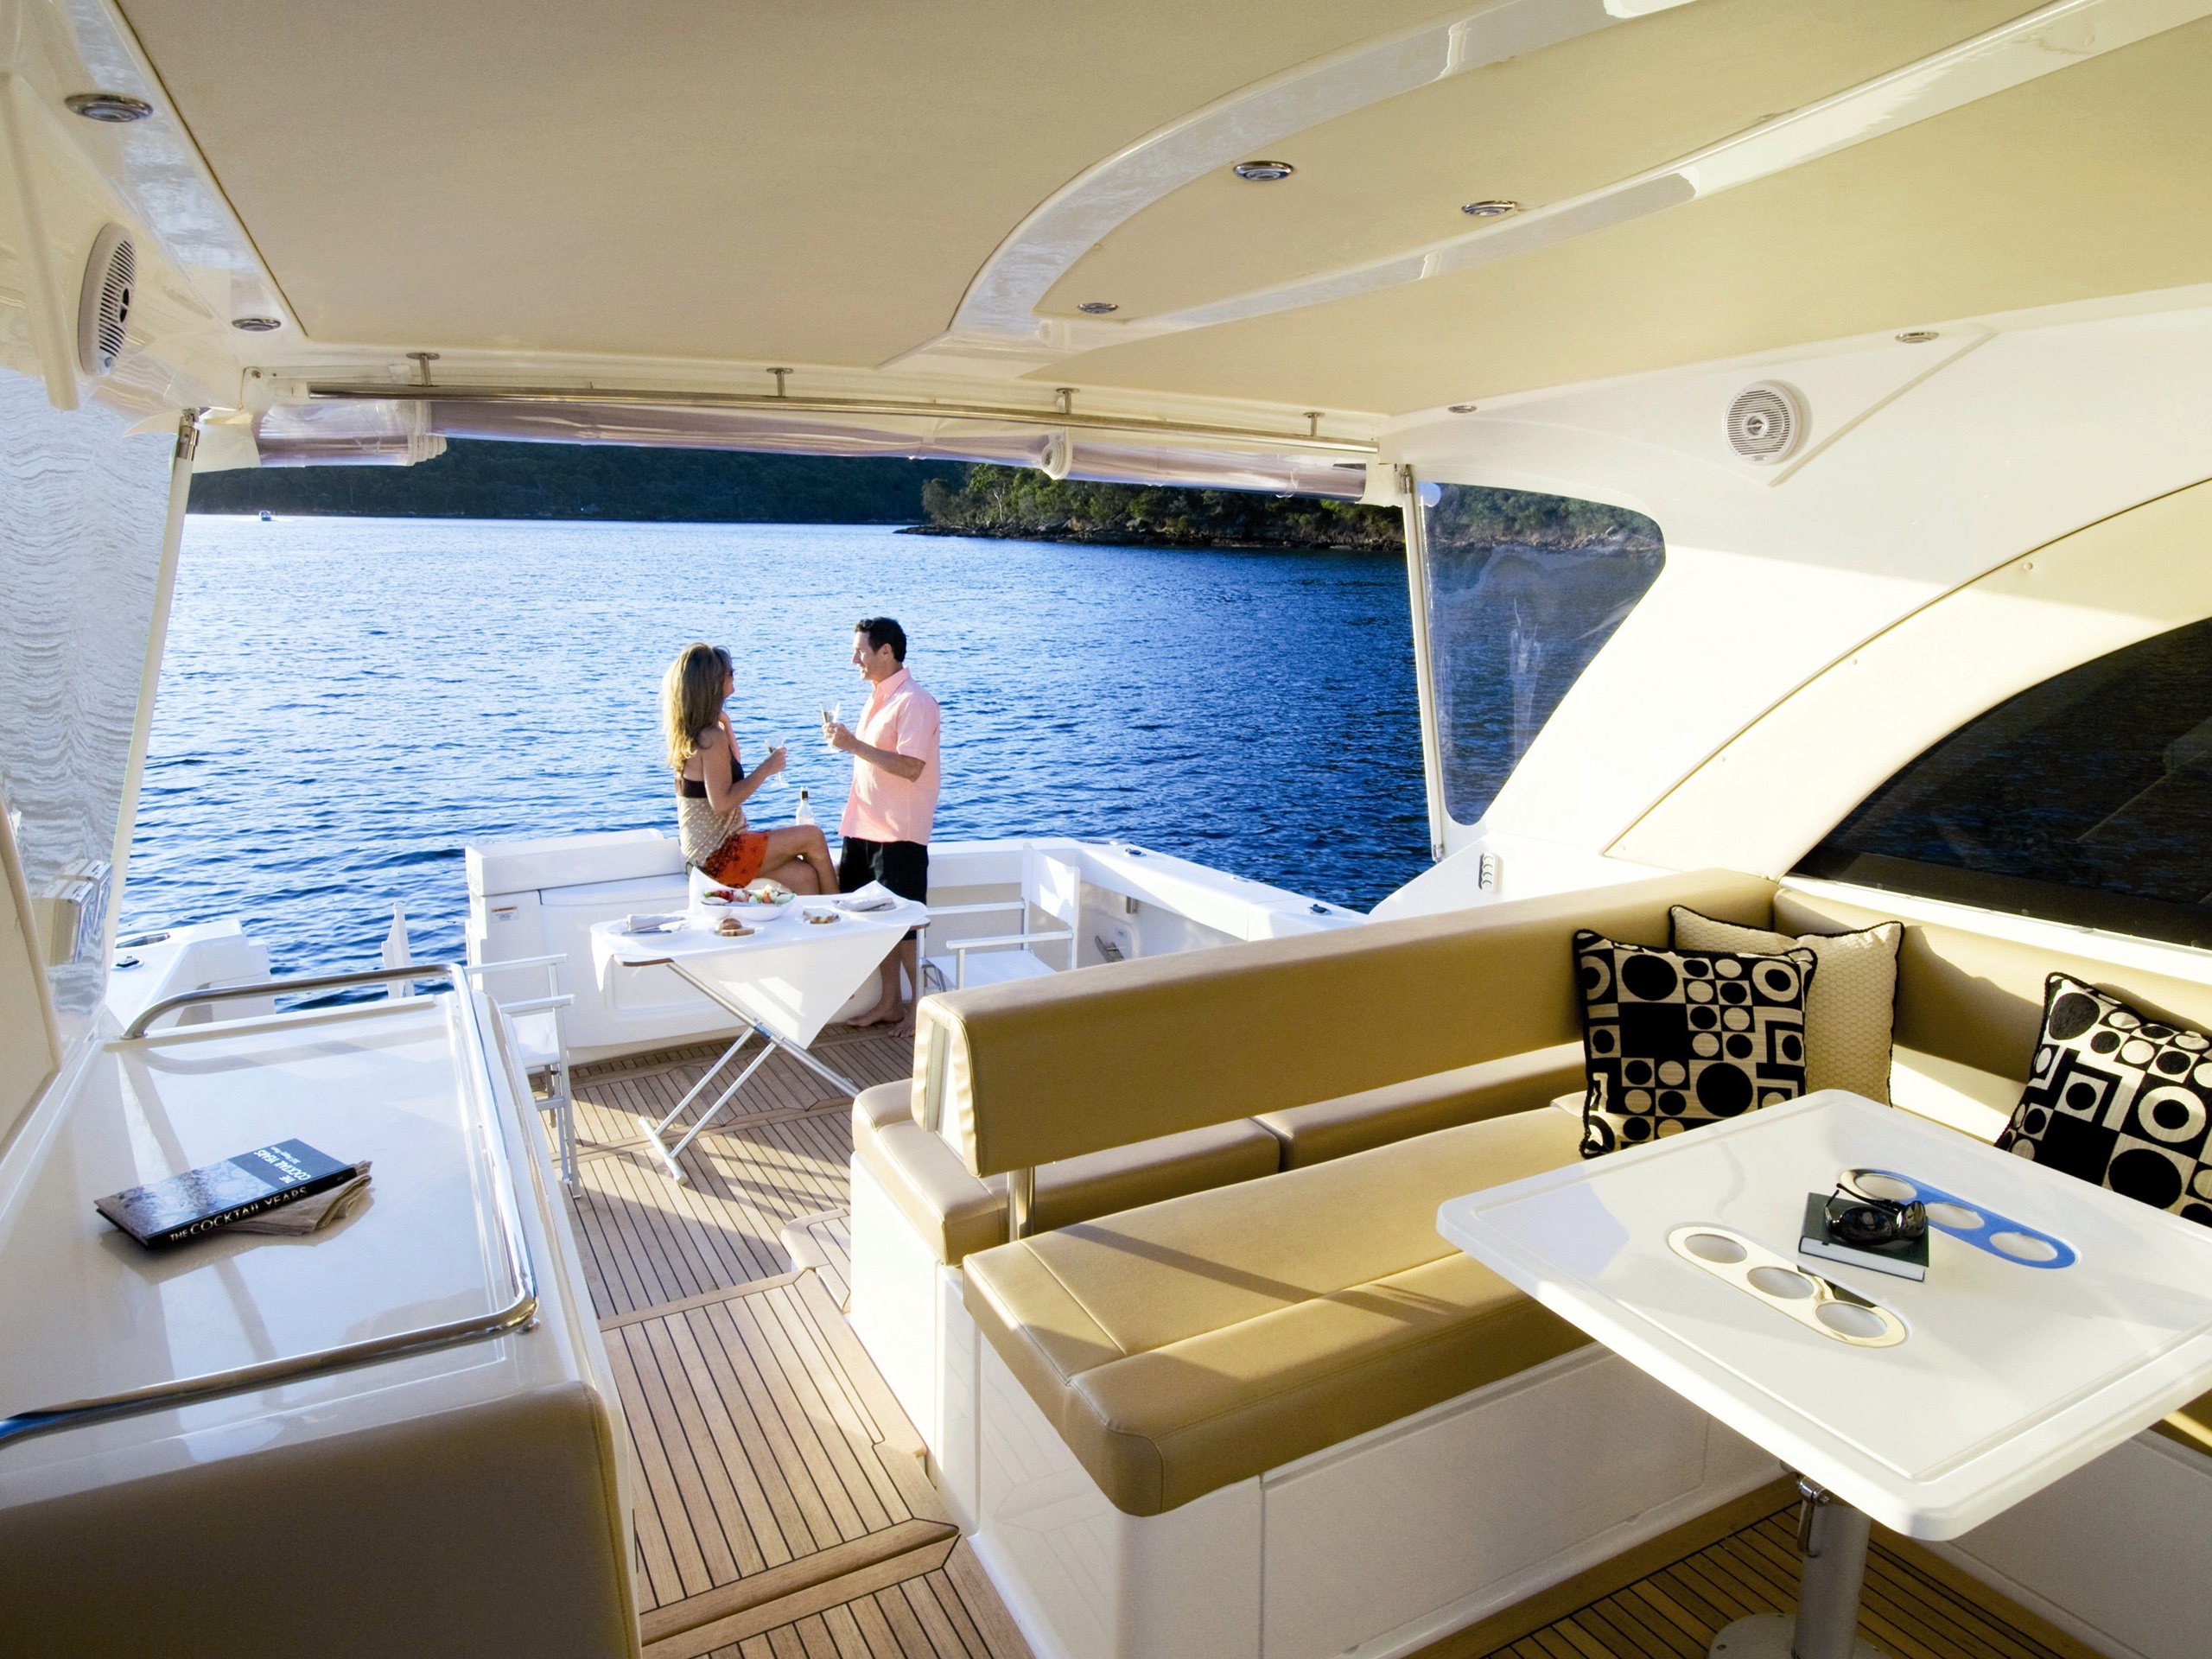 Embrace The Fractional Yachting Lifestyle With Saveene At The Helm-Meet Us At The West Palm Beach Expo Center!